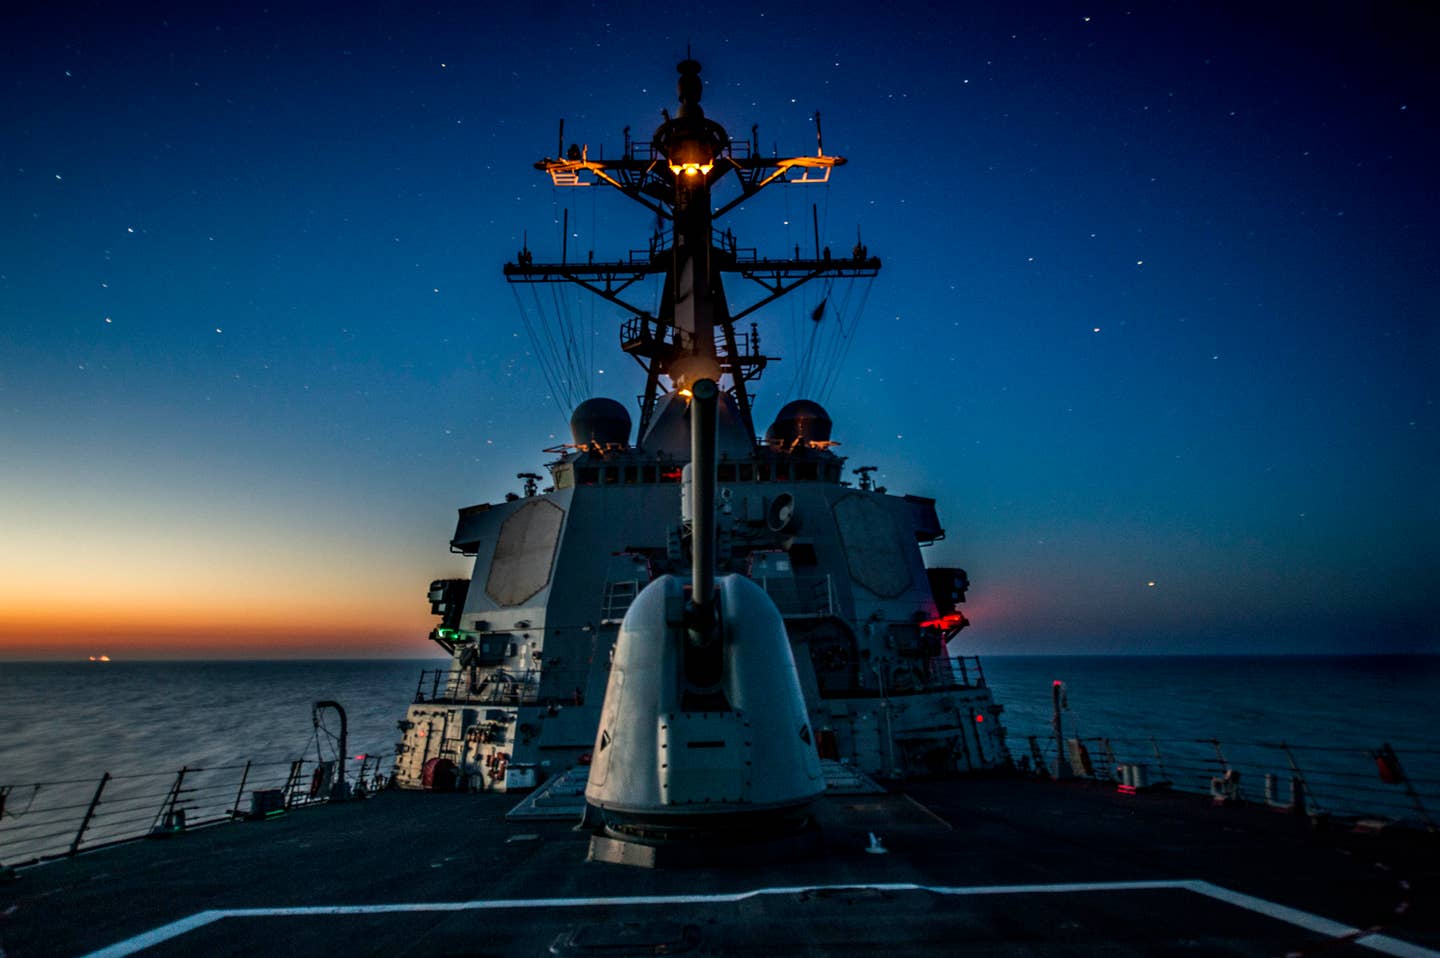 Arleigh Burke-class guided-missile destroyer USS Donald Cook transits the Black Sea.